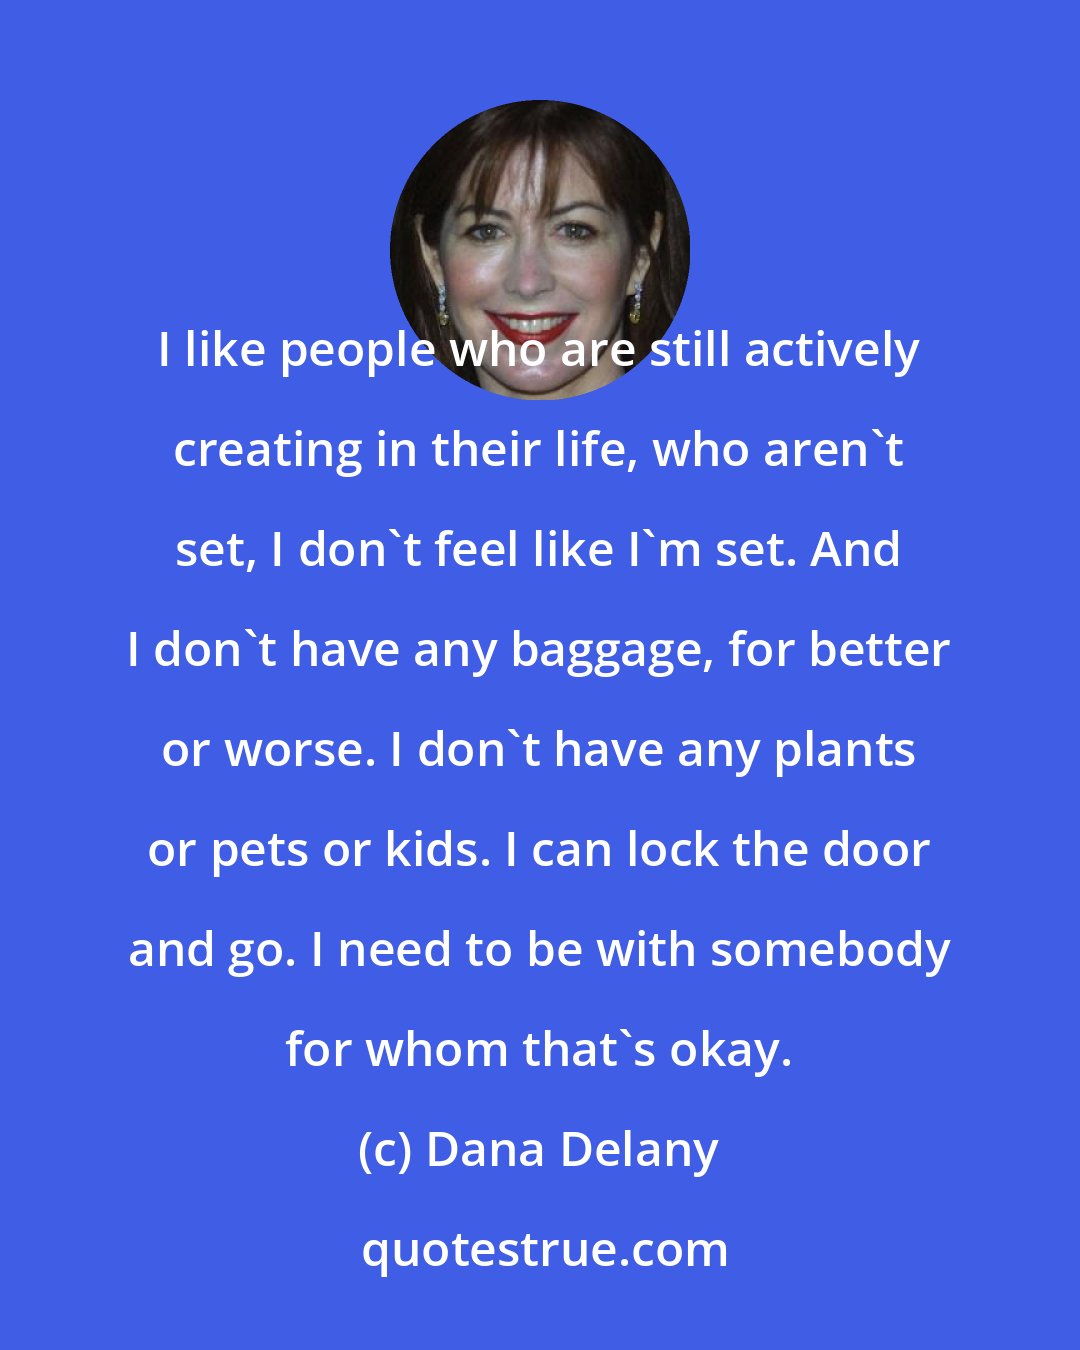 Dana Delany: I like people who are still actively creating in their life, who aren't set, I don't feel like I'm set. And I don't have any baggage, for better or worse. I don't have any plants or pets or kids. I can lock the door and go. I need to be with somebody for whom that's okay.